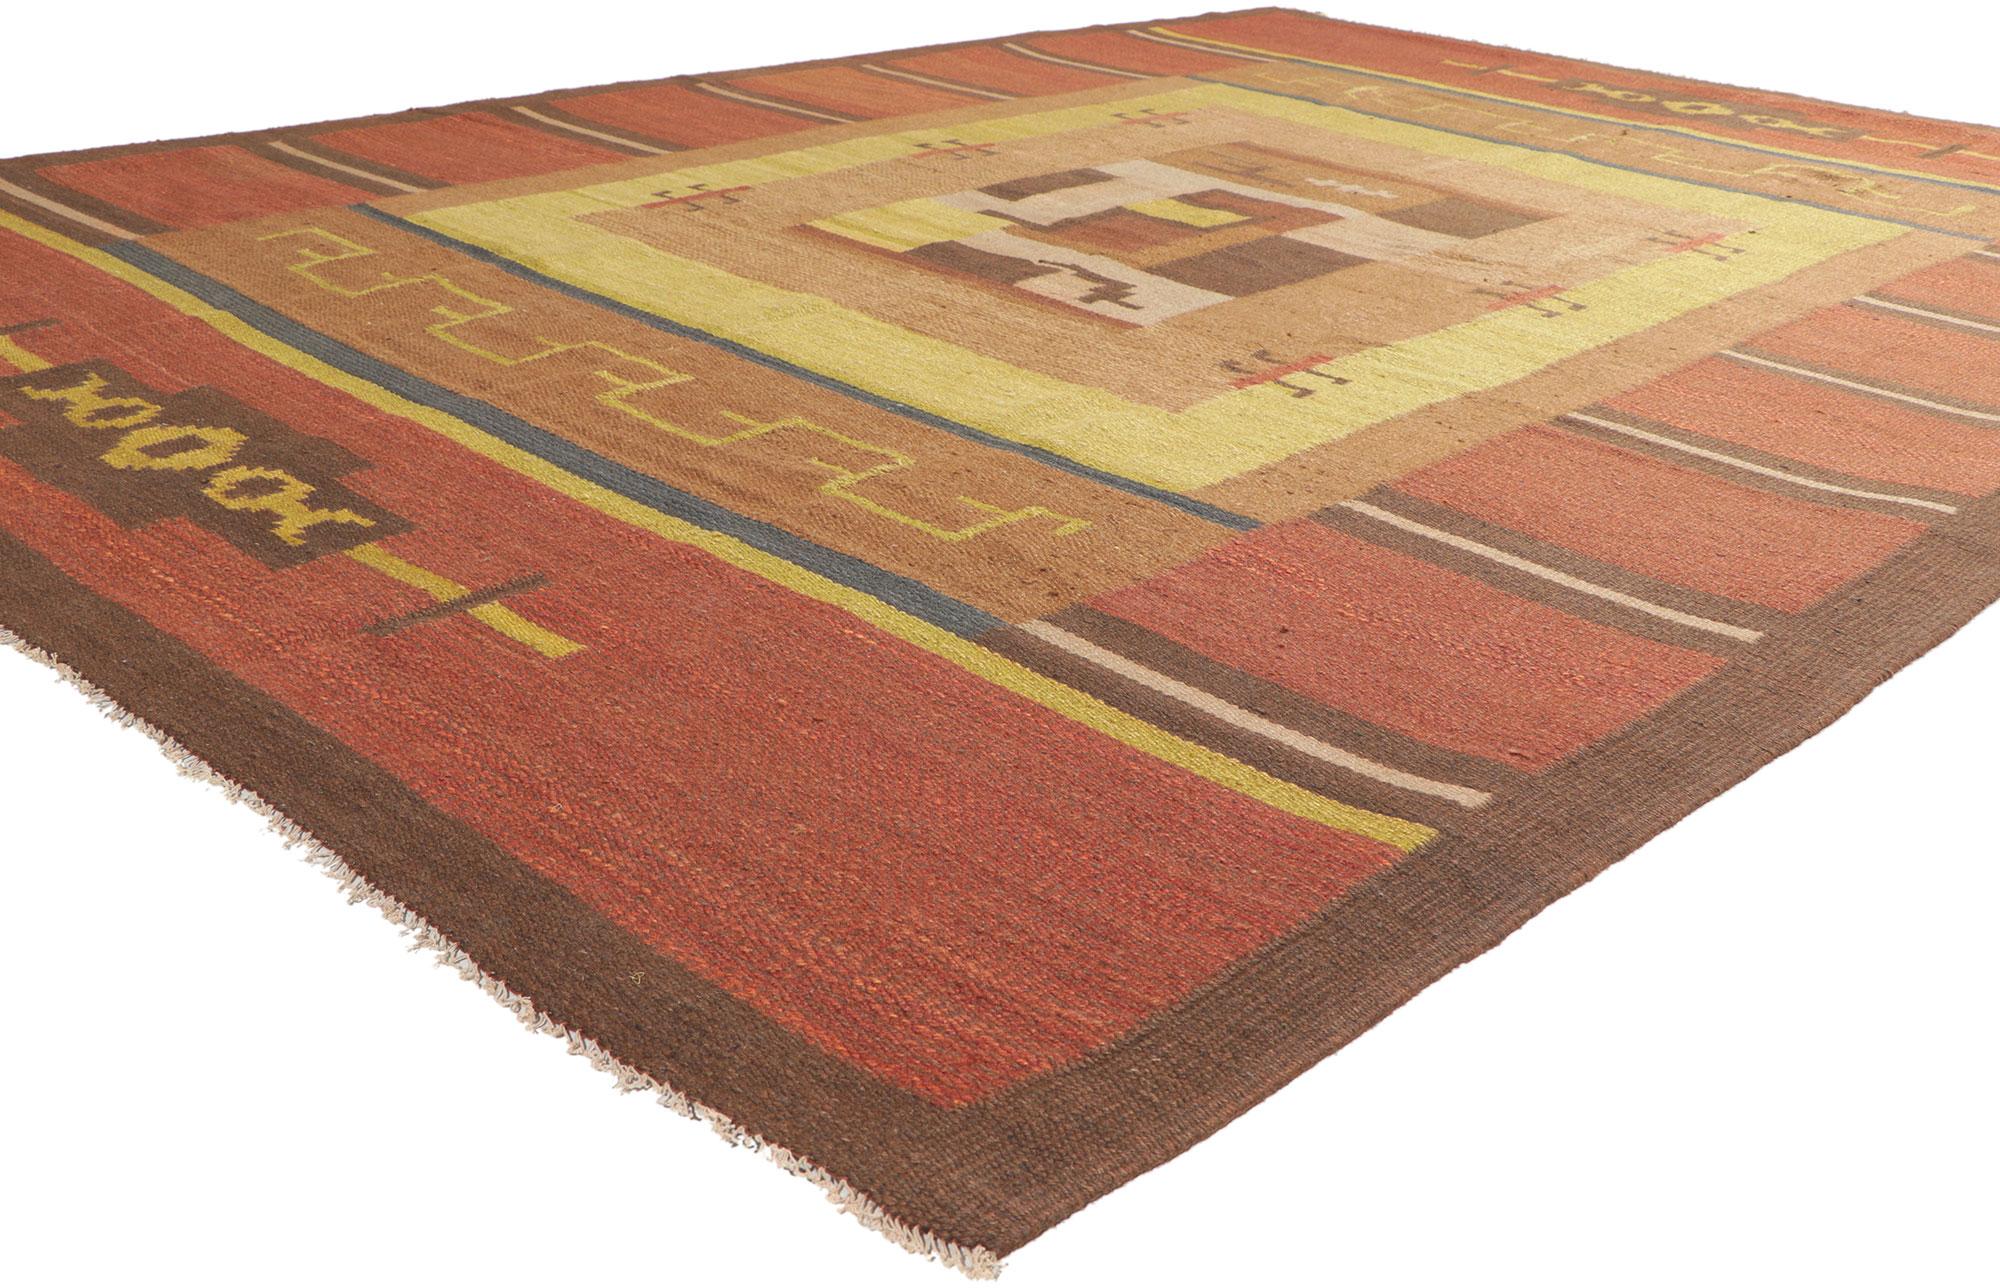 784867 Impi Sotavalta Vintage Finnish Flatweave Rug, 07'0 x 09'10. Bauhaus simplicity meets stylized Art Deco in this handwoven Finnish flatweave rug. The eye-catching geometric design and earthy colorway woven into this piece work together creating